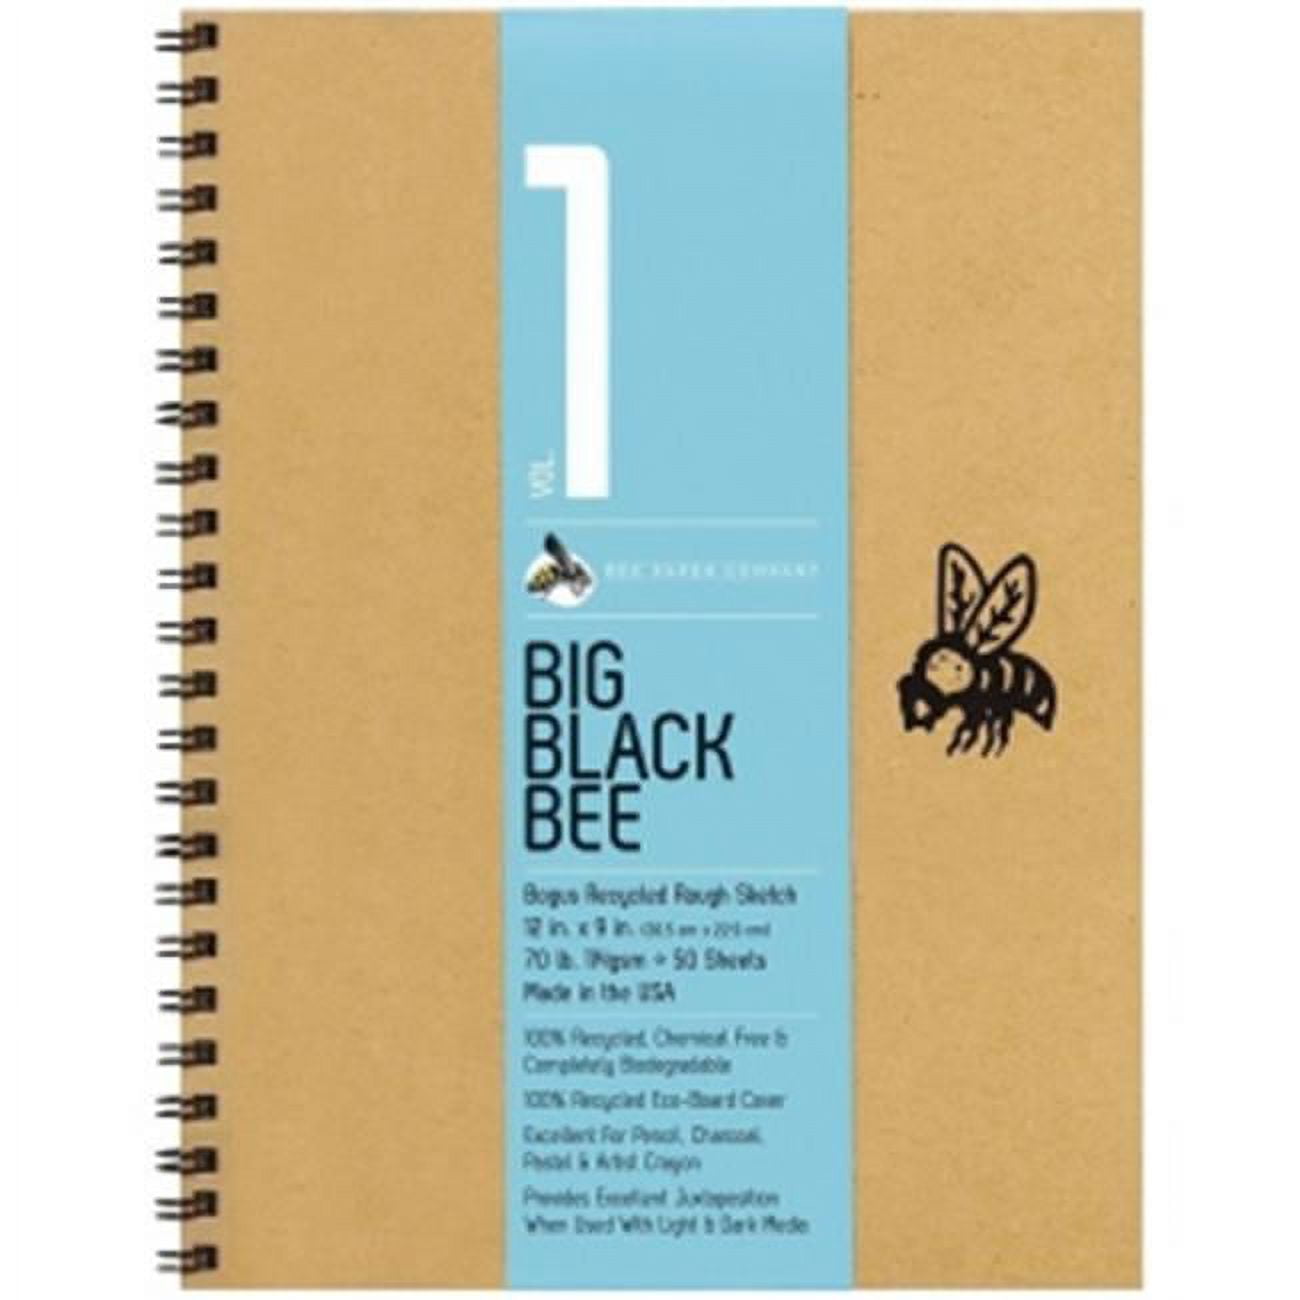 Sketchbook : 100+ Blank Pages, 8. 5 X 11 Inches, Sketch Pad for Drawing,  Doodling, Writing or Sketching by Happy Books Happy Books Hub (2018, Trade  Paperback, Large Type / large print edition) for sale online